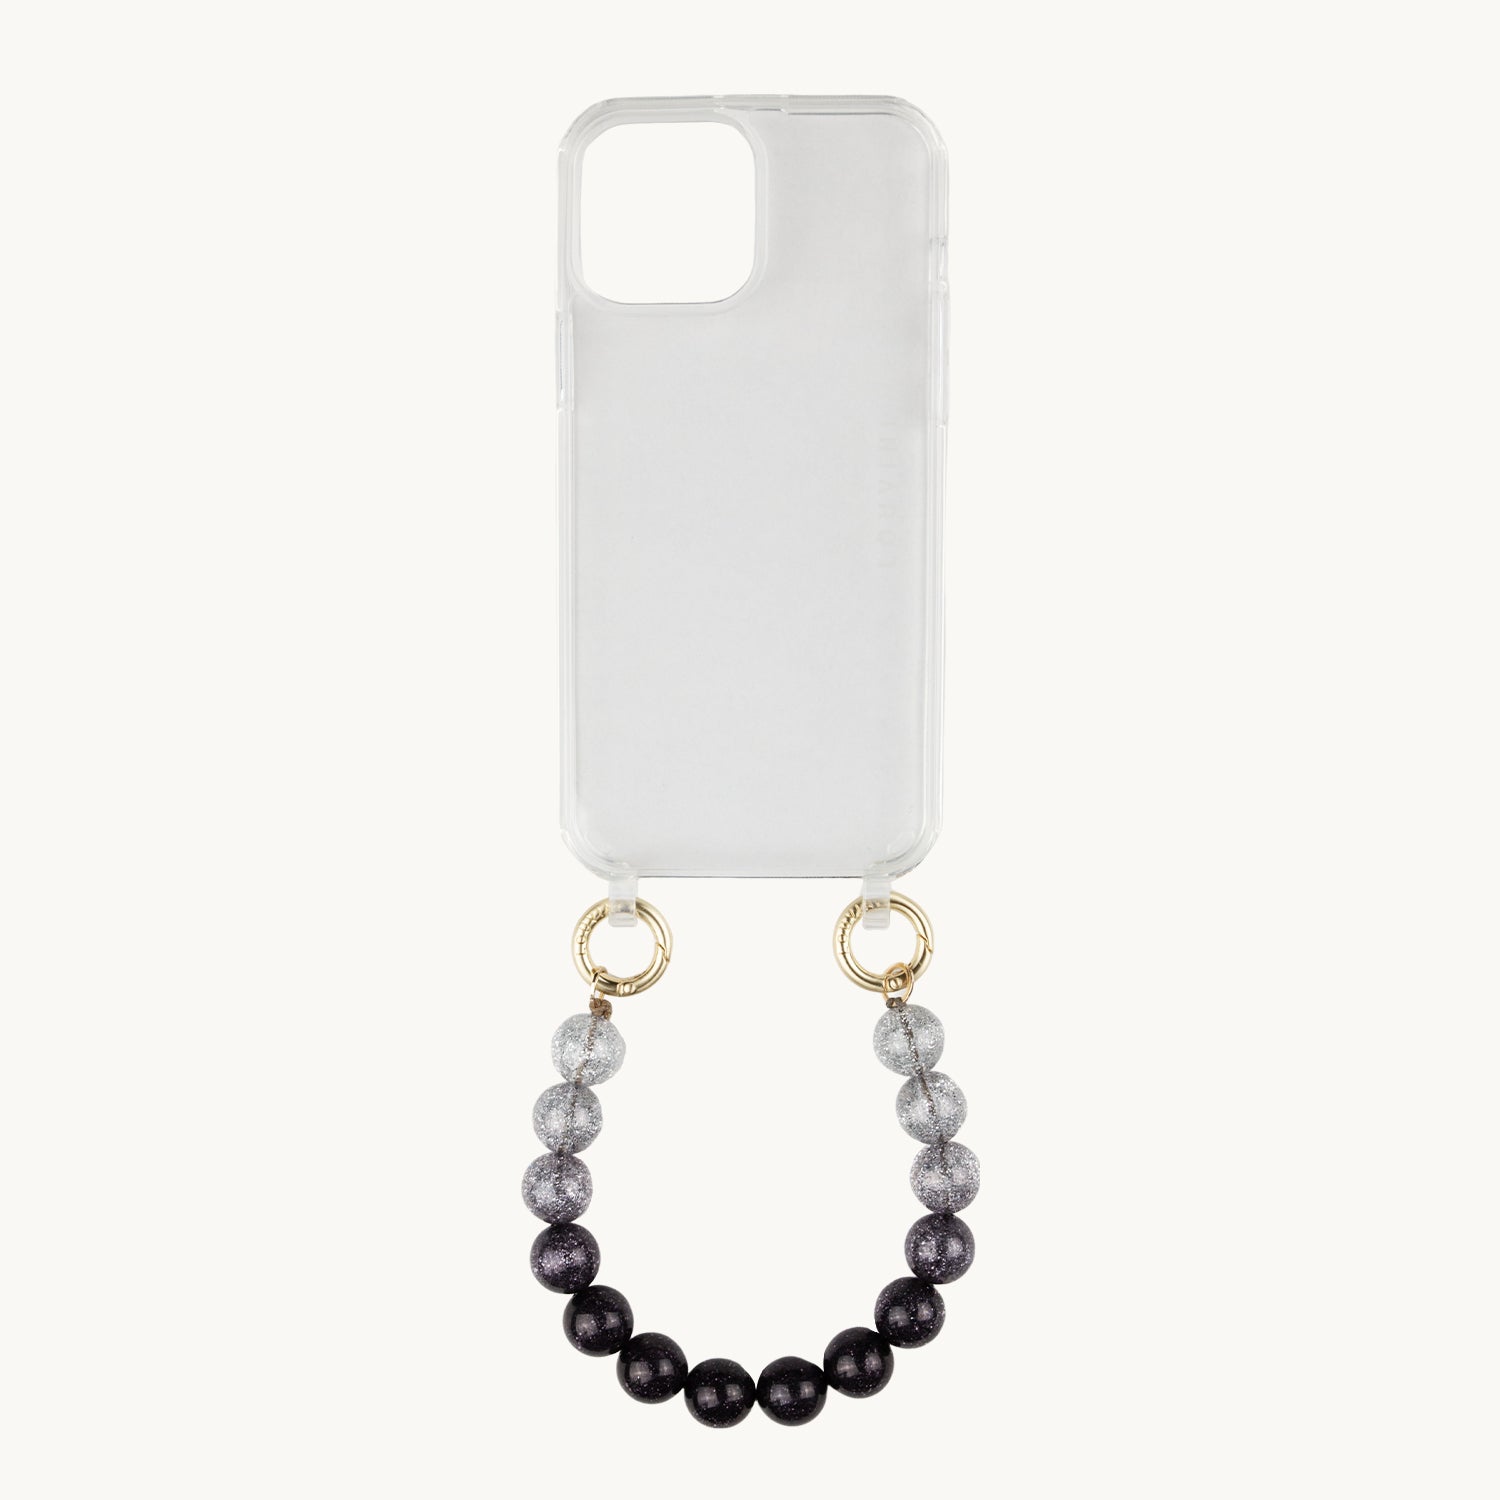 CHARLIE IPHONE CASE & BLACK PETIT BILLY CHAIN